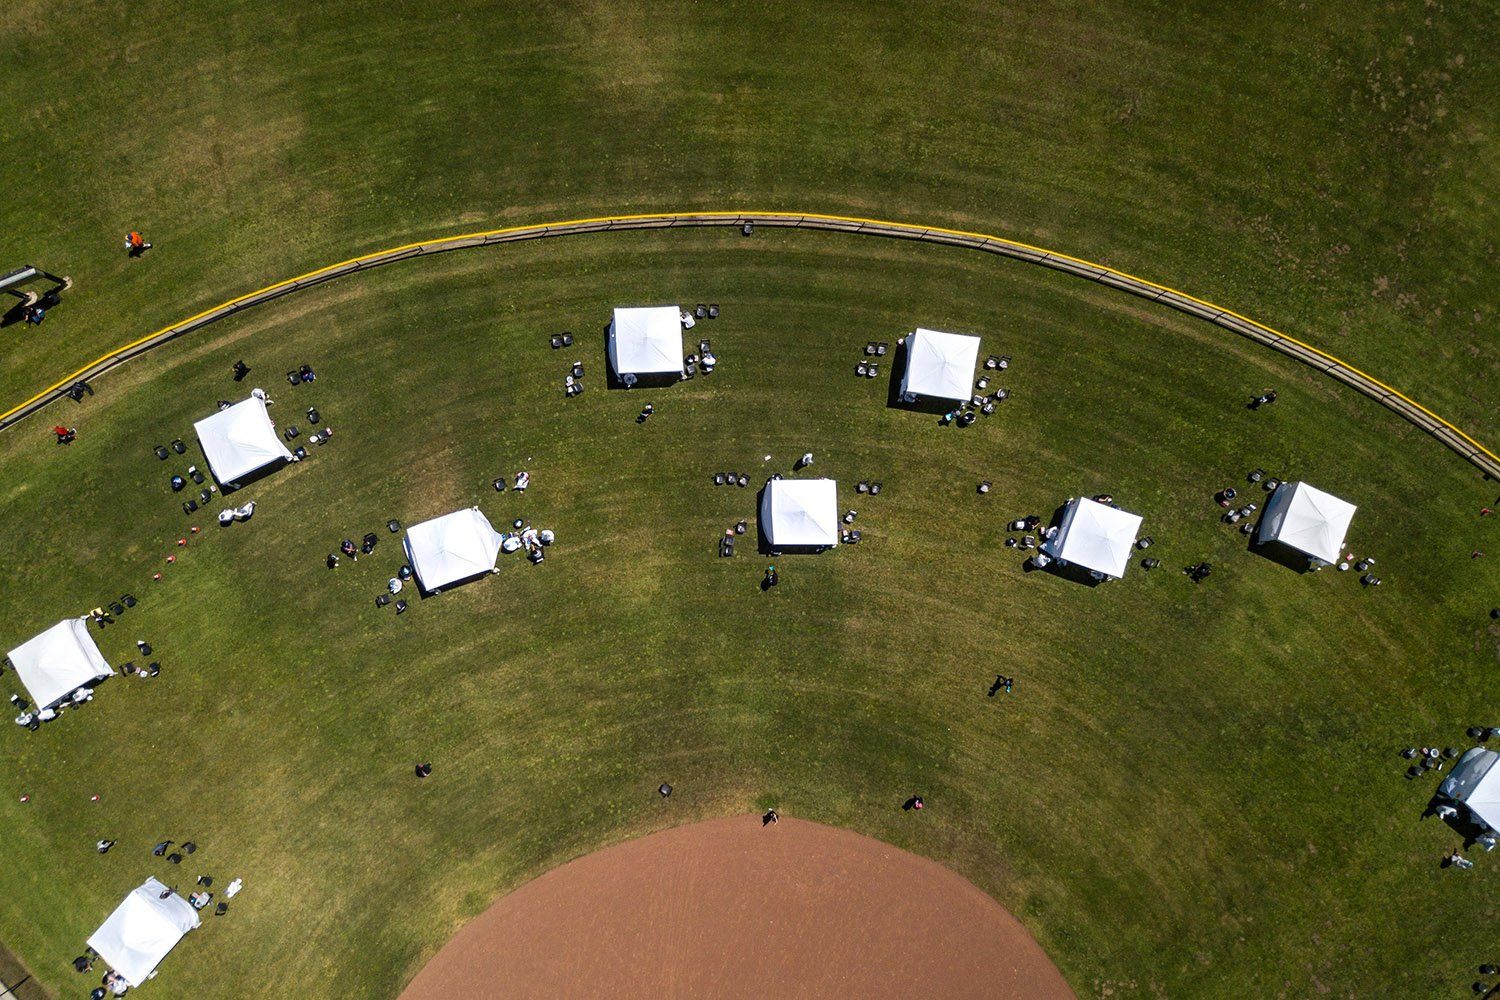 An overhead view of COVID-19 testing tents scattered across a baseball field